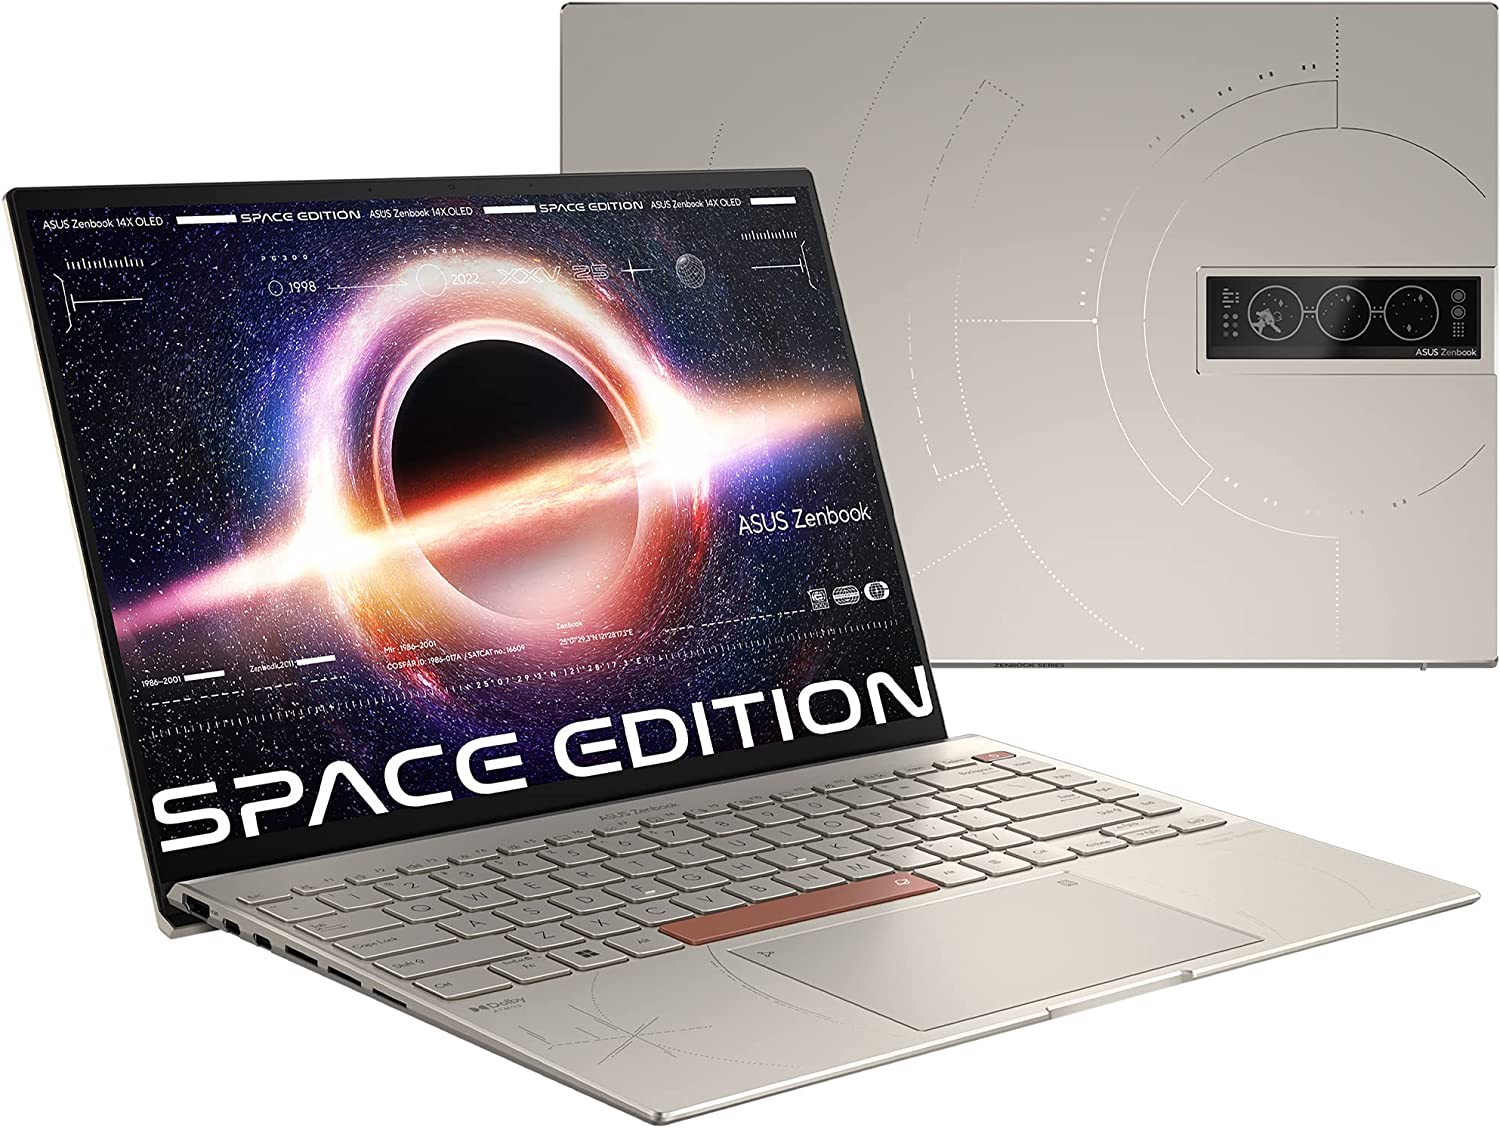 Space Edition Laptop